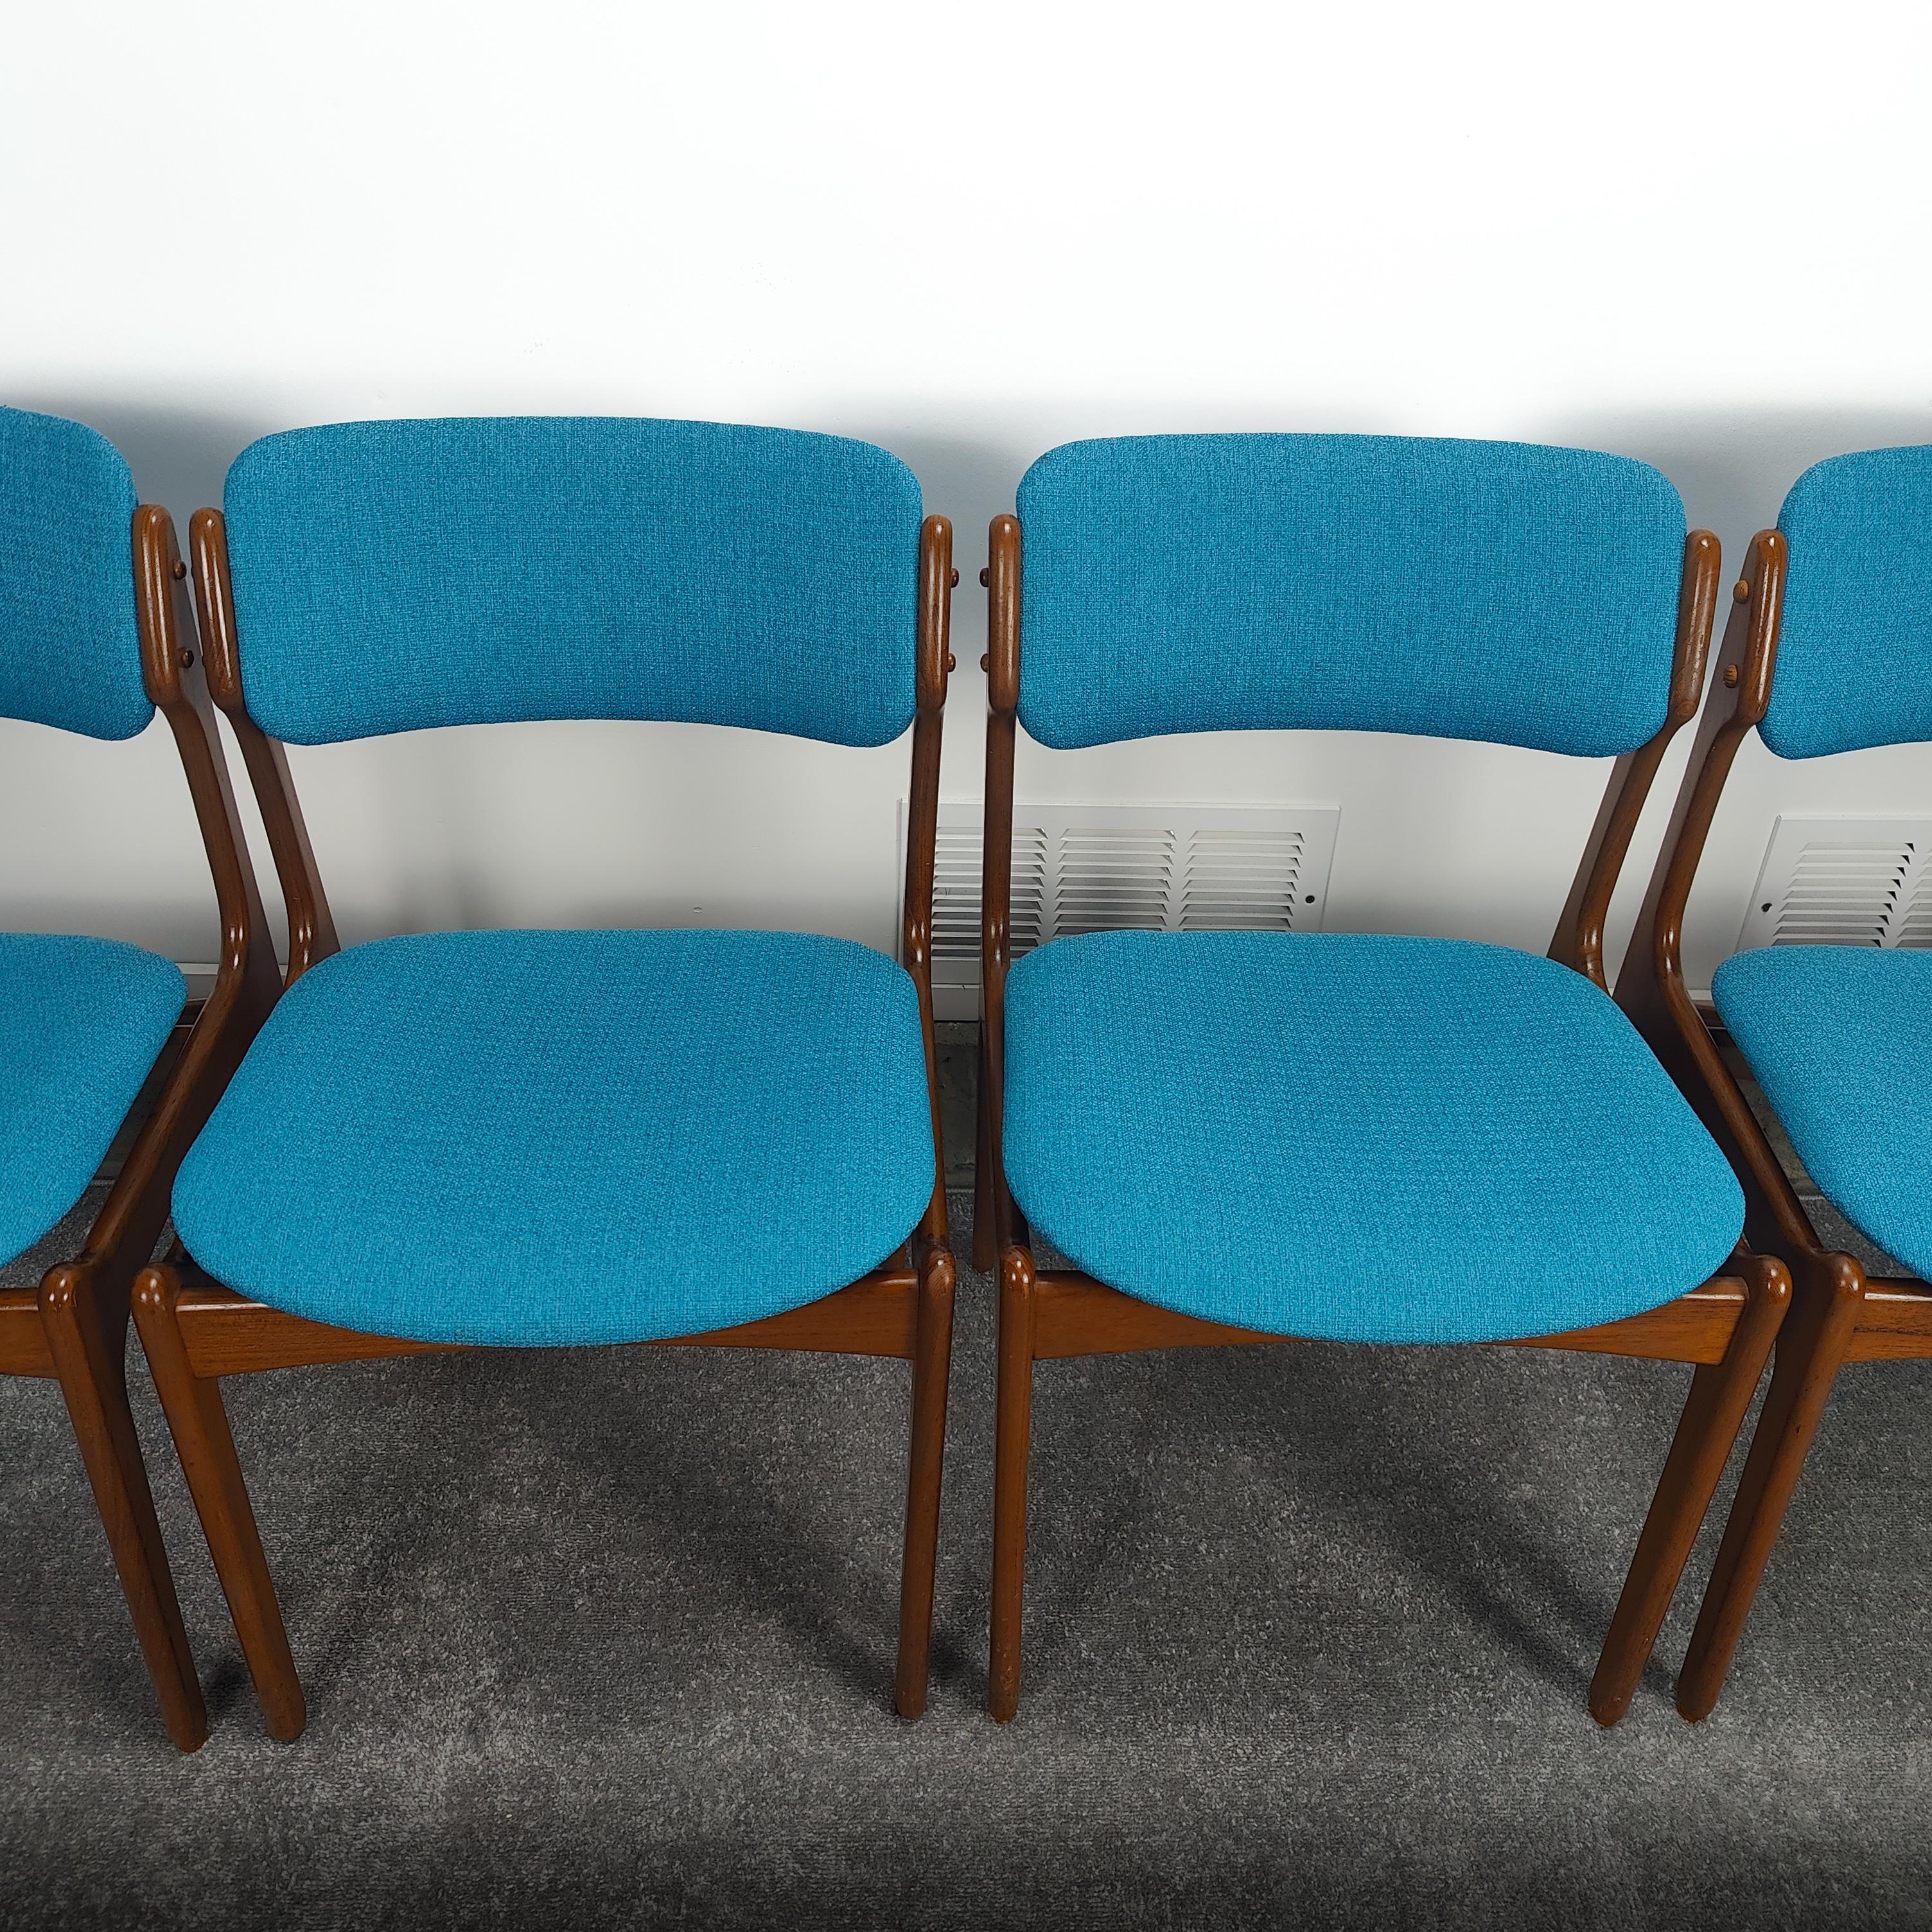 Vintage Mid-Century Modern Teak Dining Chairs by Erik Buch for O.D. Mobler 2